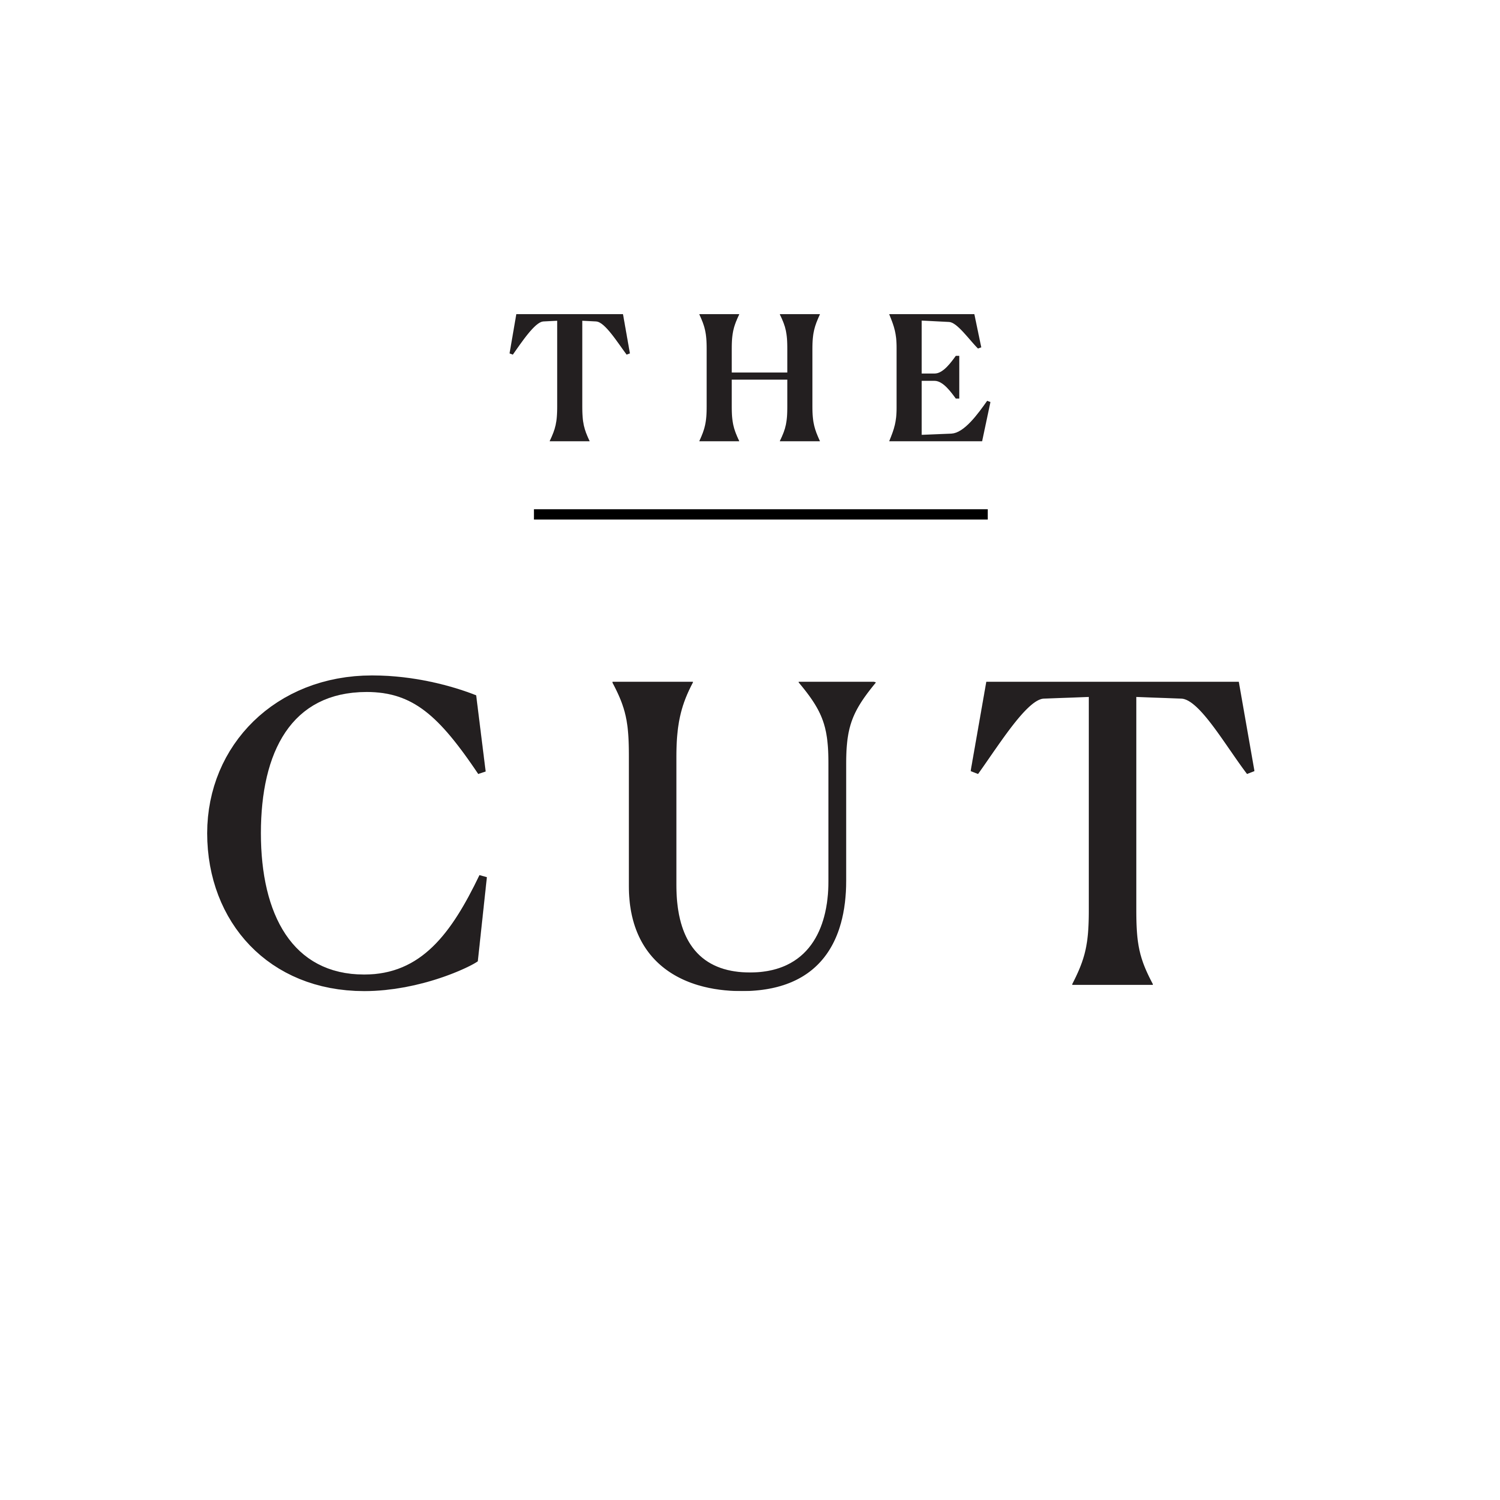 MAKING THE CUT - MY SITE